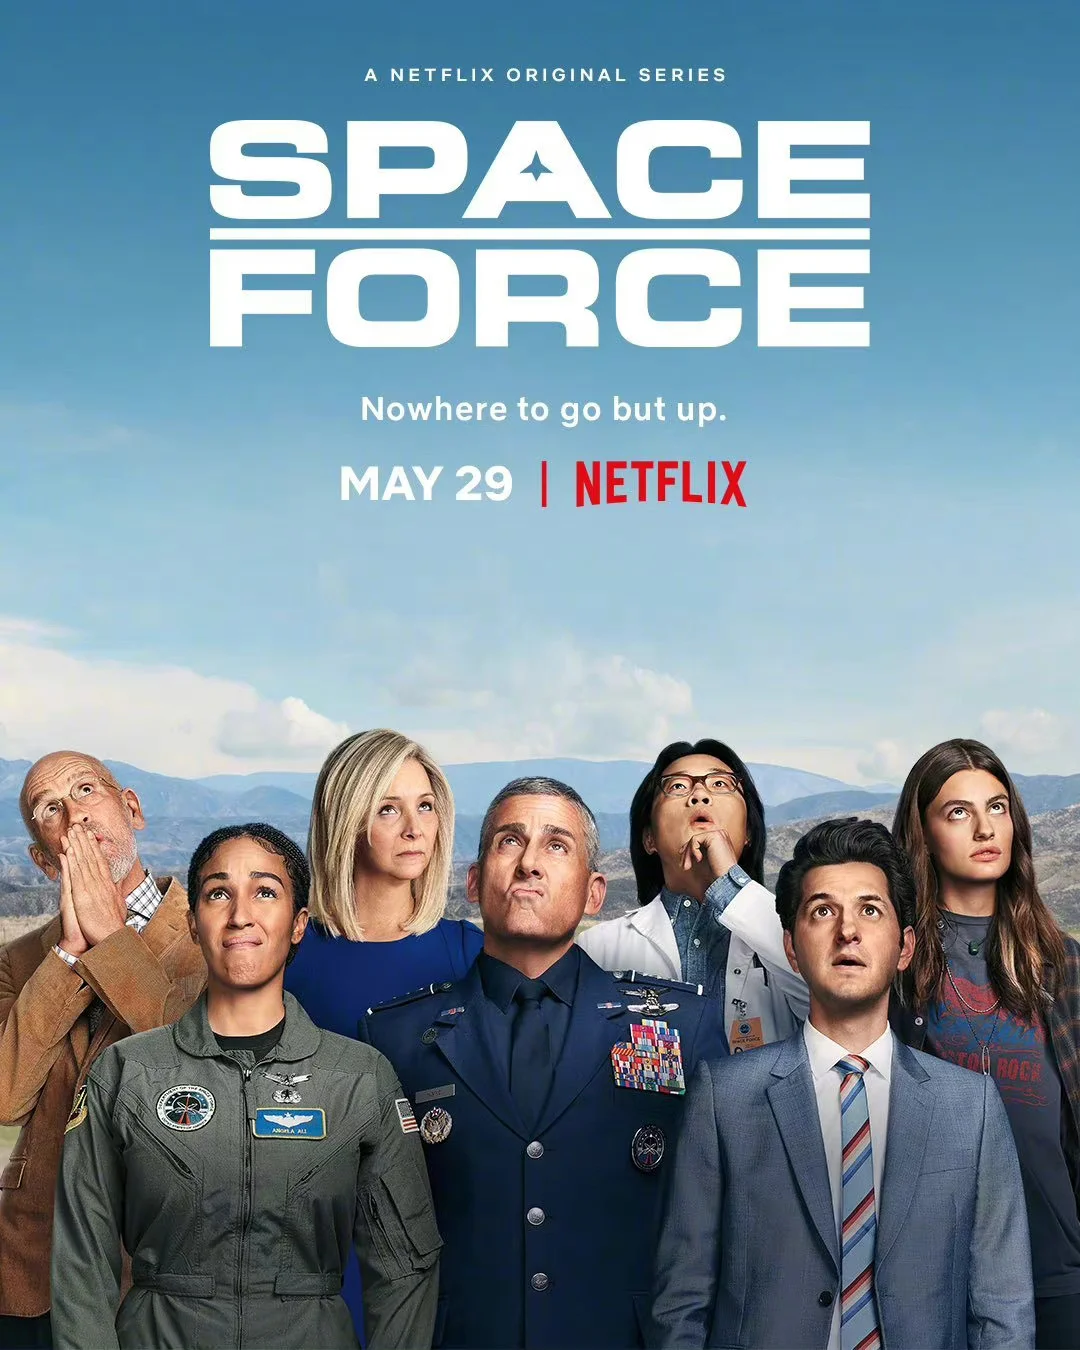 Netflix announces cancellation of comedy 'Space Force'